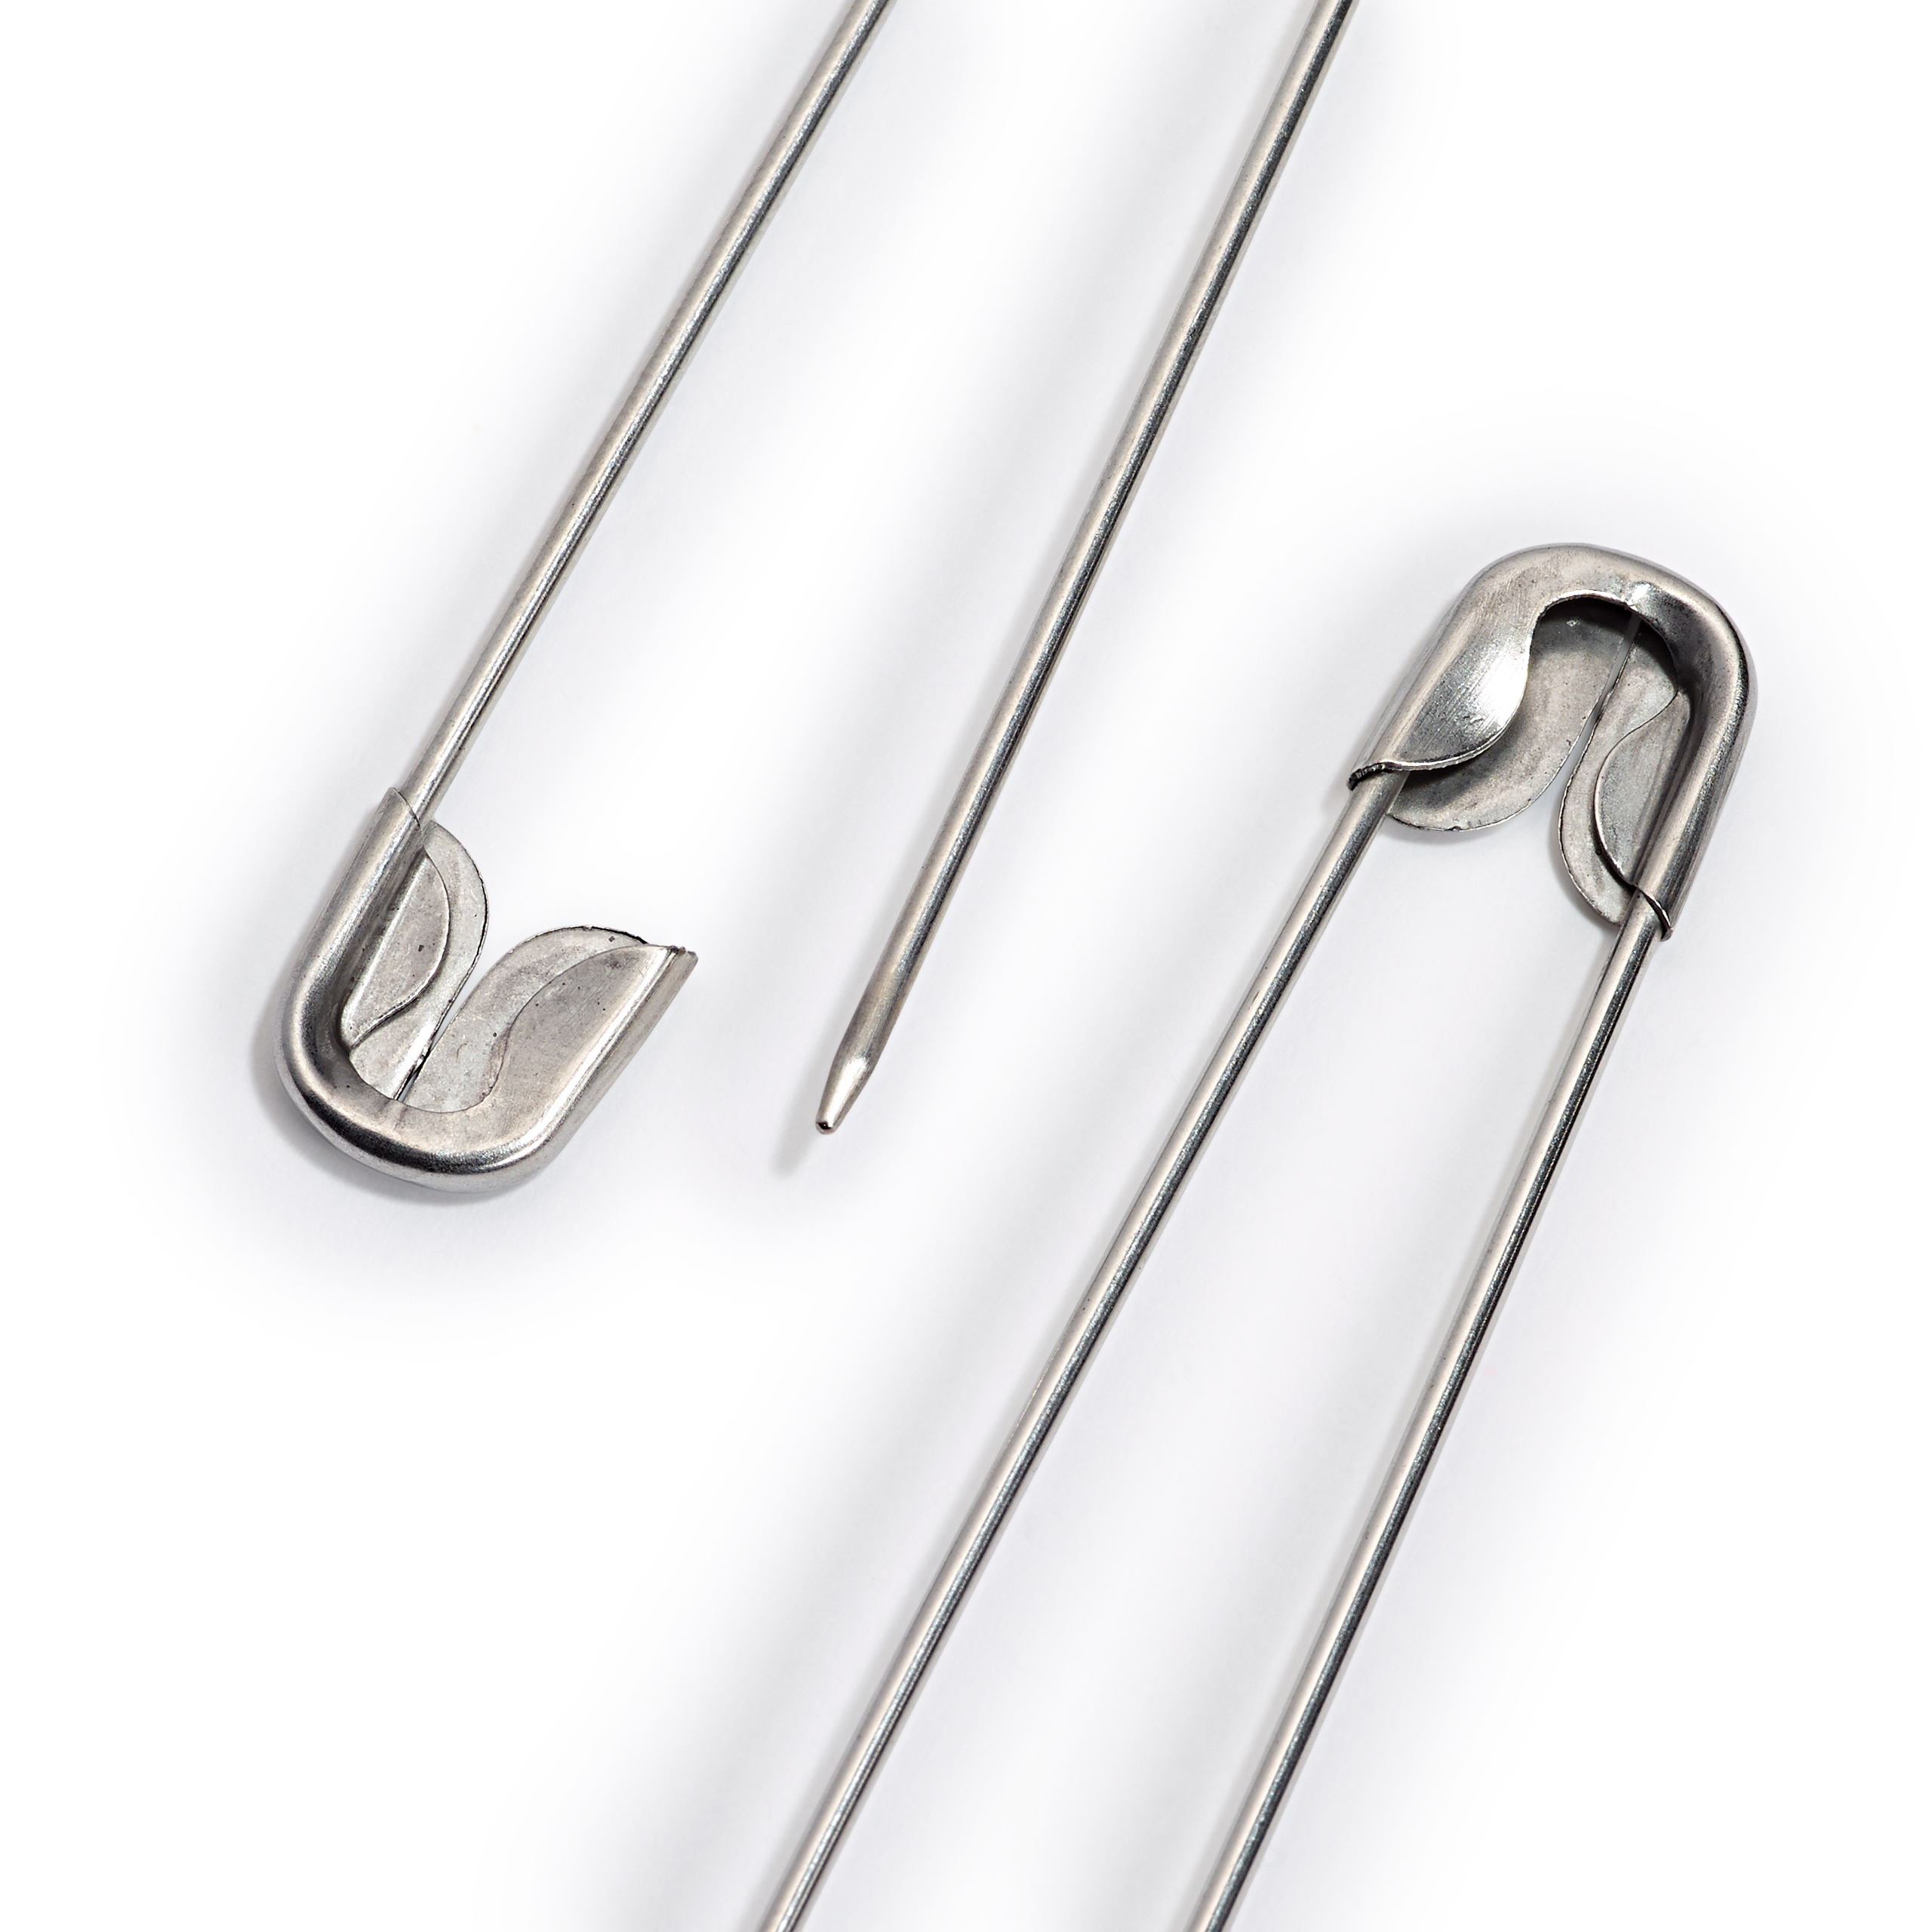 Stitch holder stainless steel 135 mm silver col, 2 St